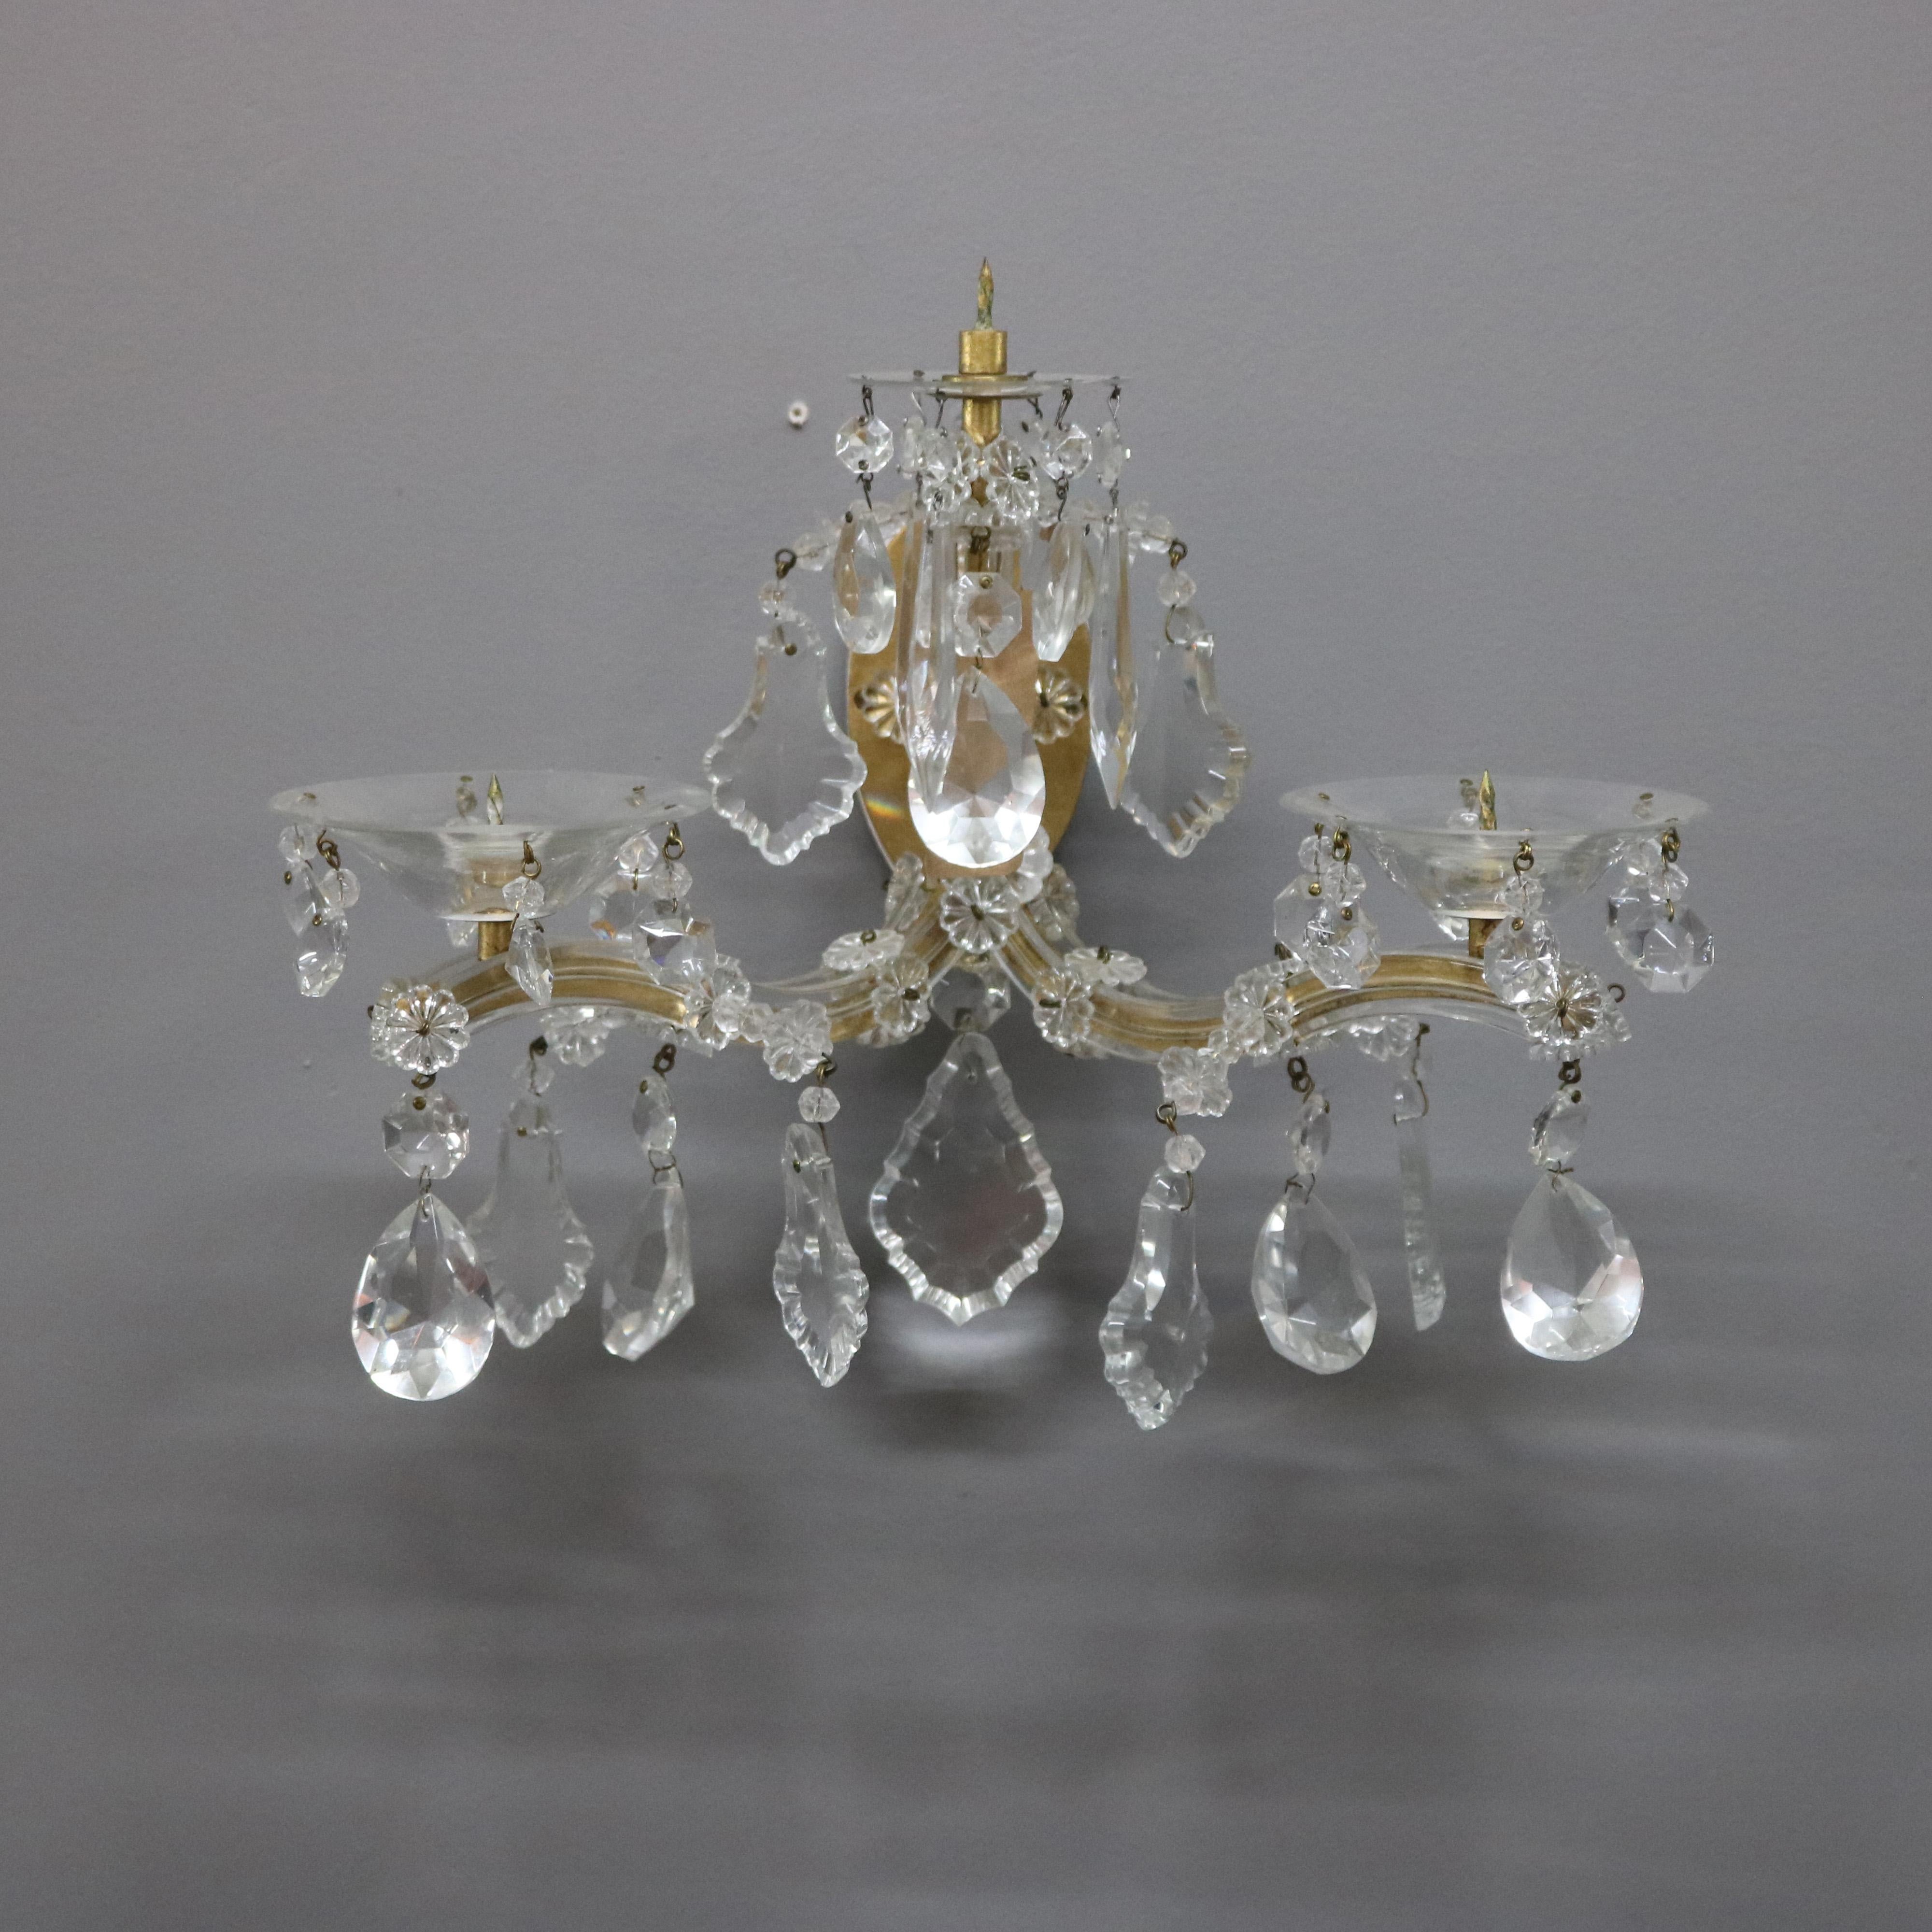 20th Century Pair of French Style Brass & Crystal Candle Wall Sconces, circa 1940